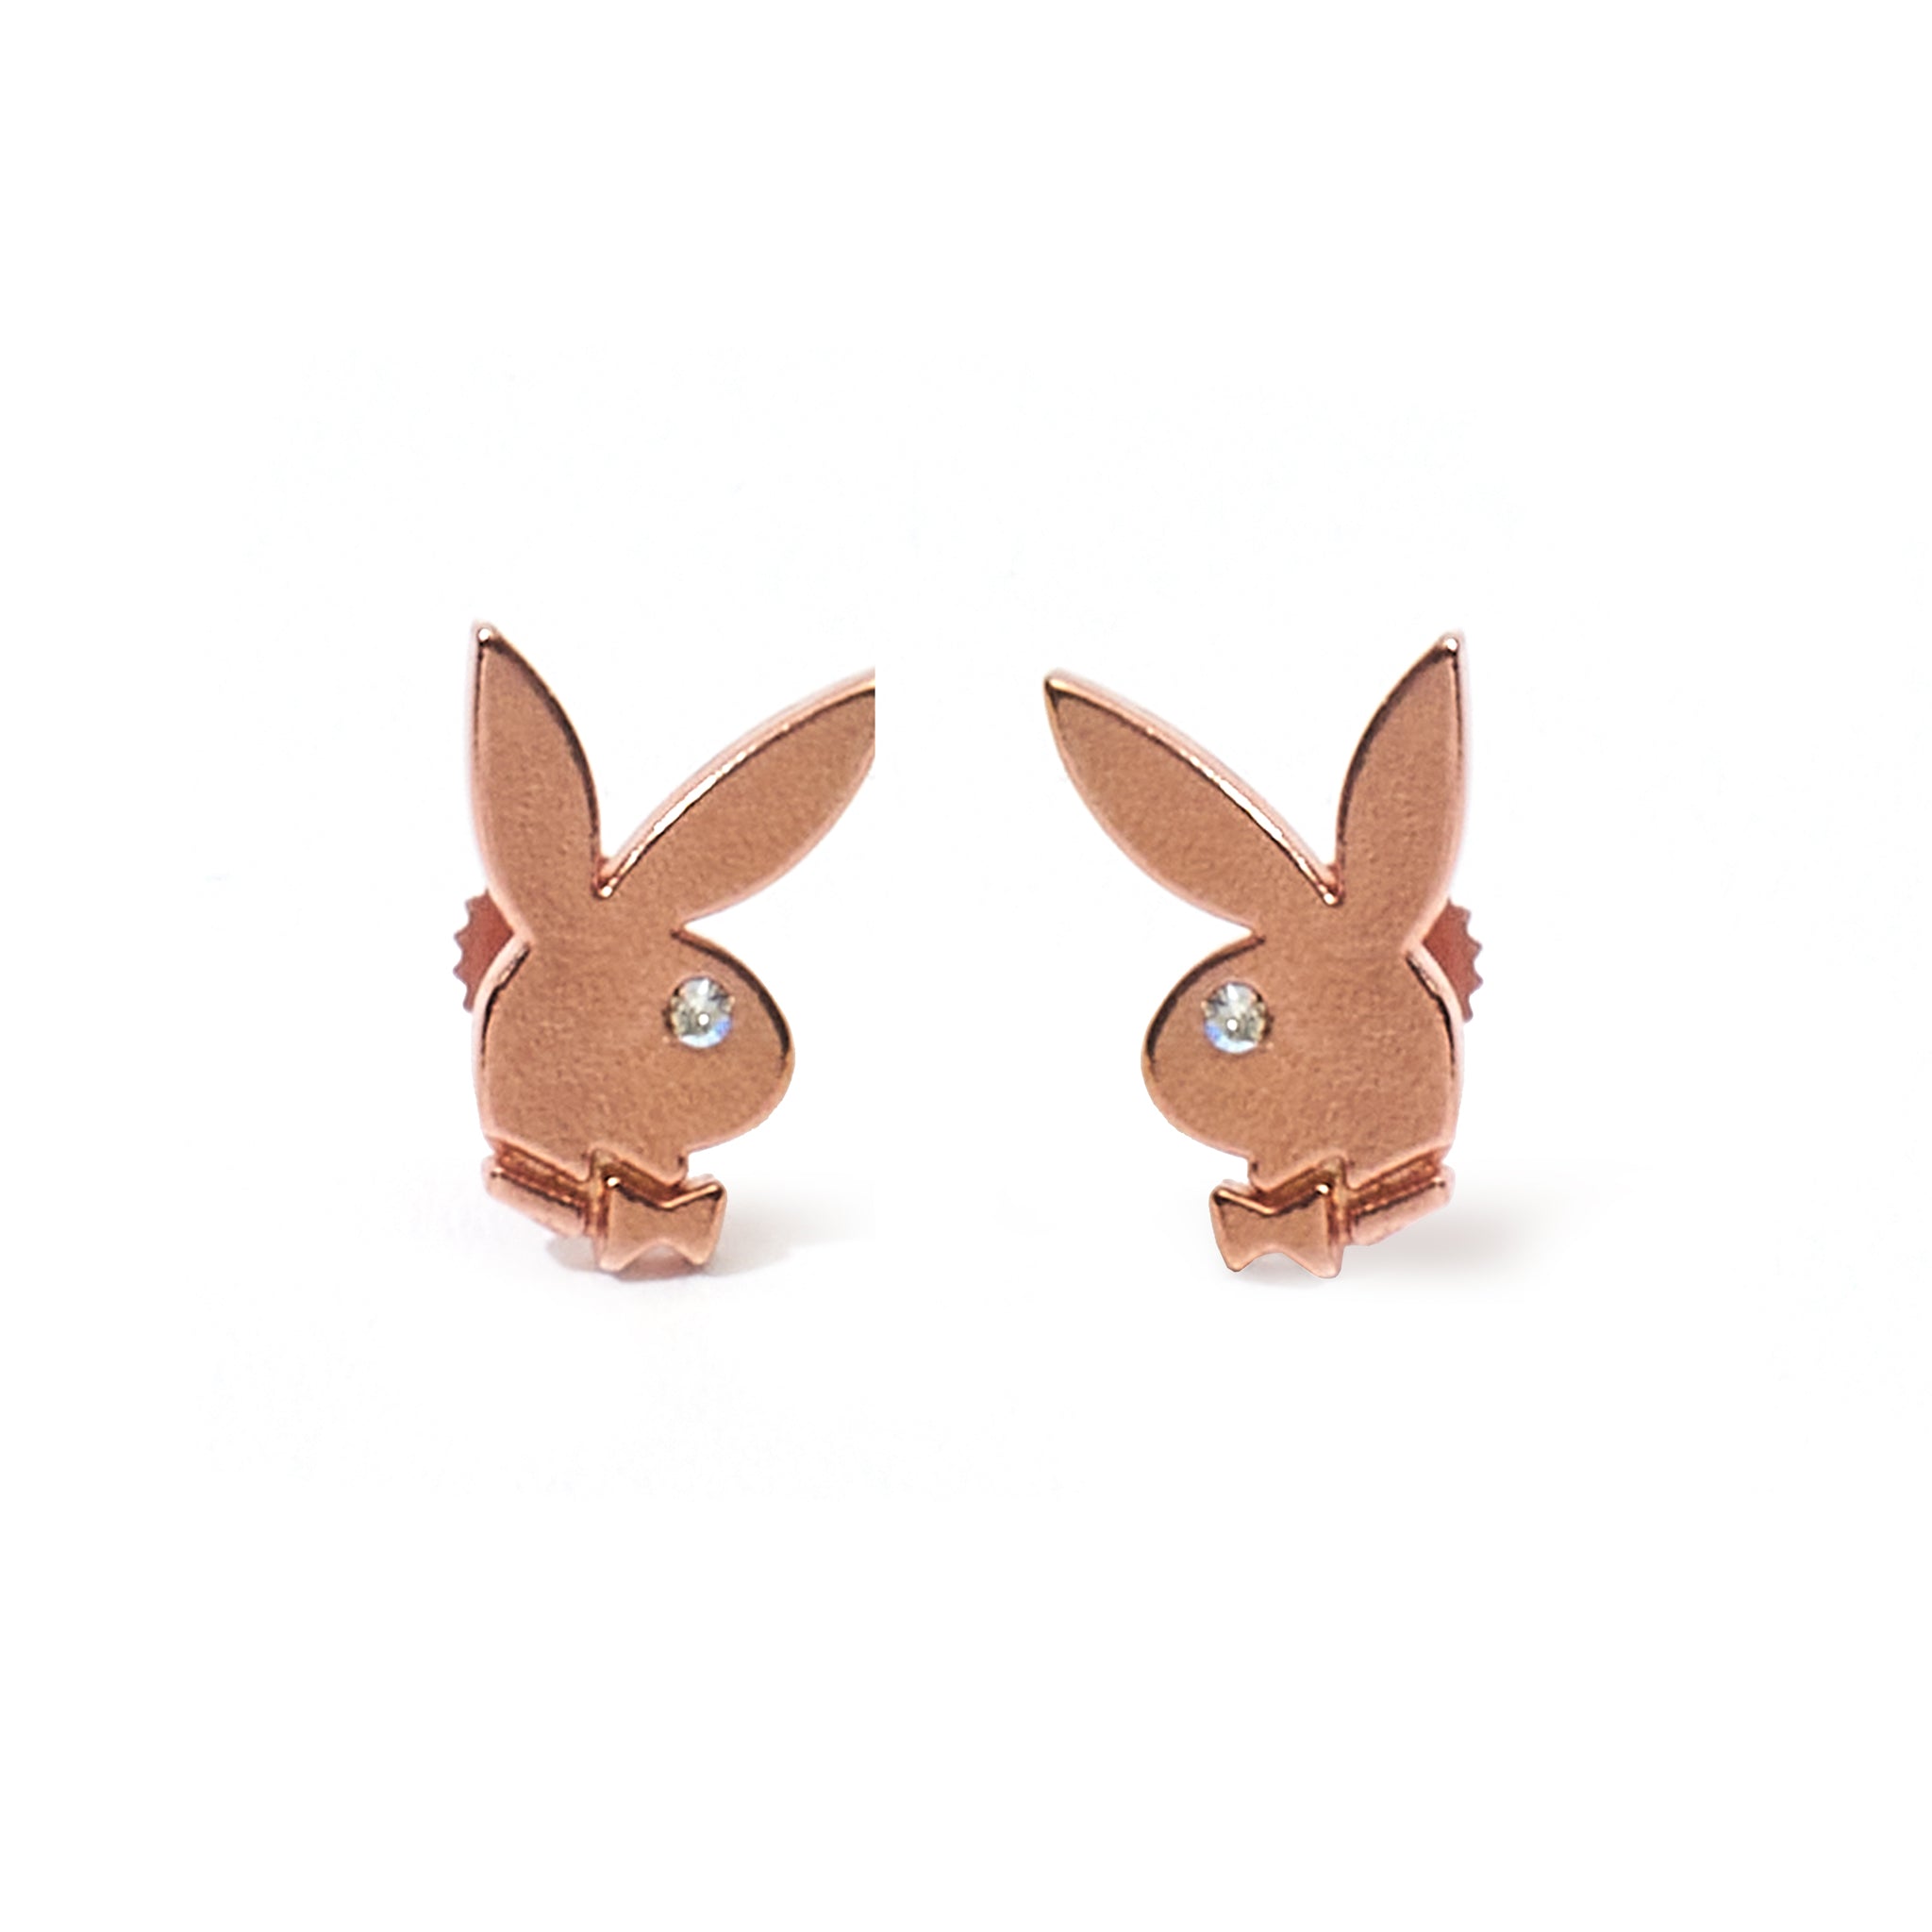 14K Gold-Plated Sterling Silver Stud Earrings: Captivating Bunny Studs